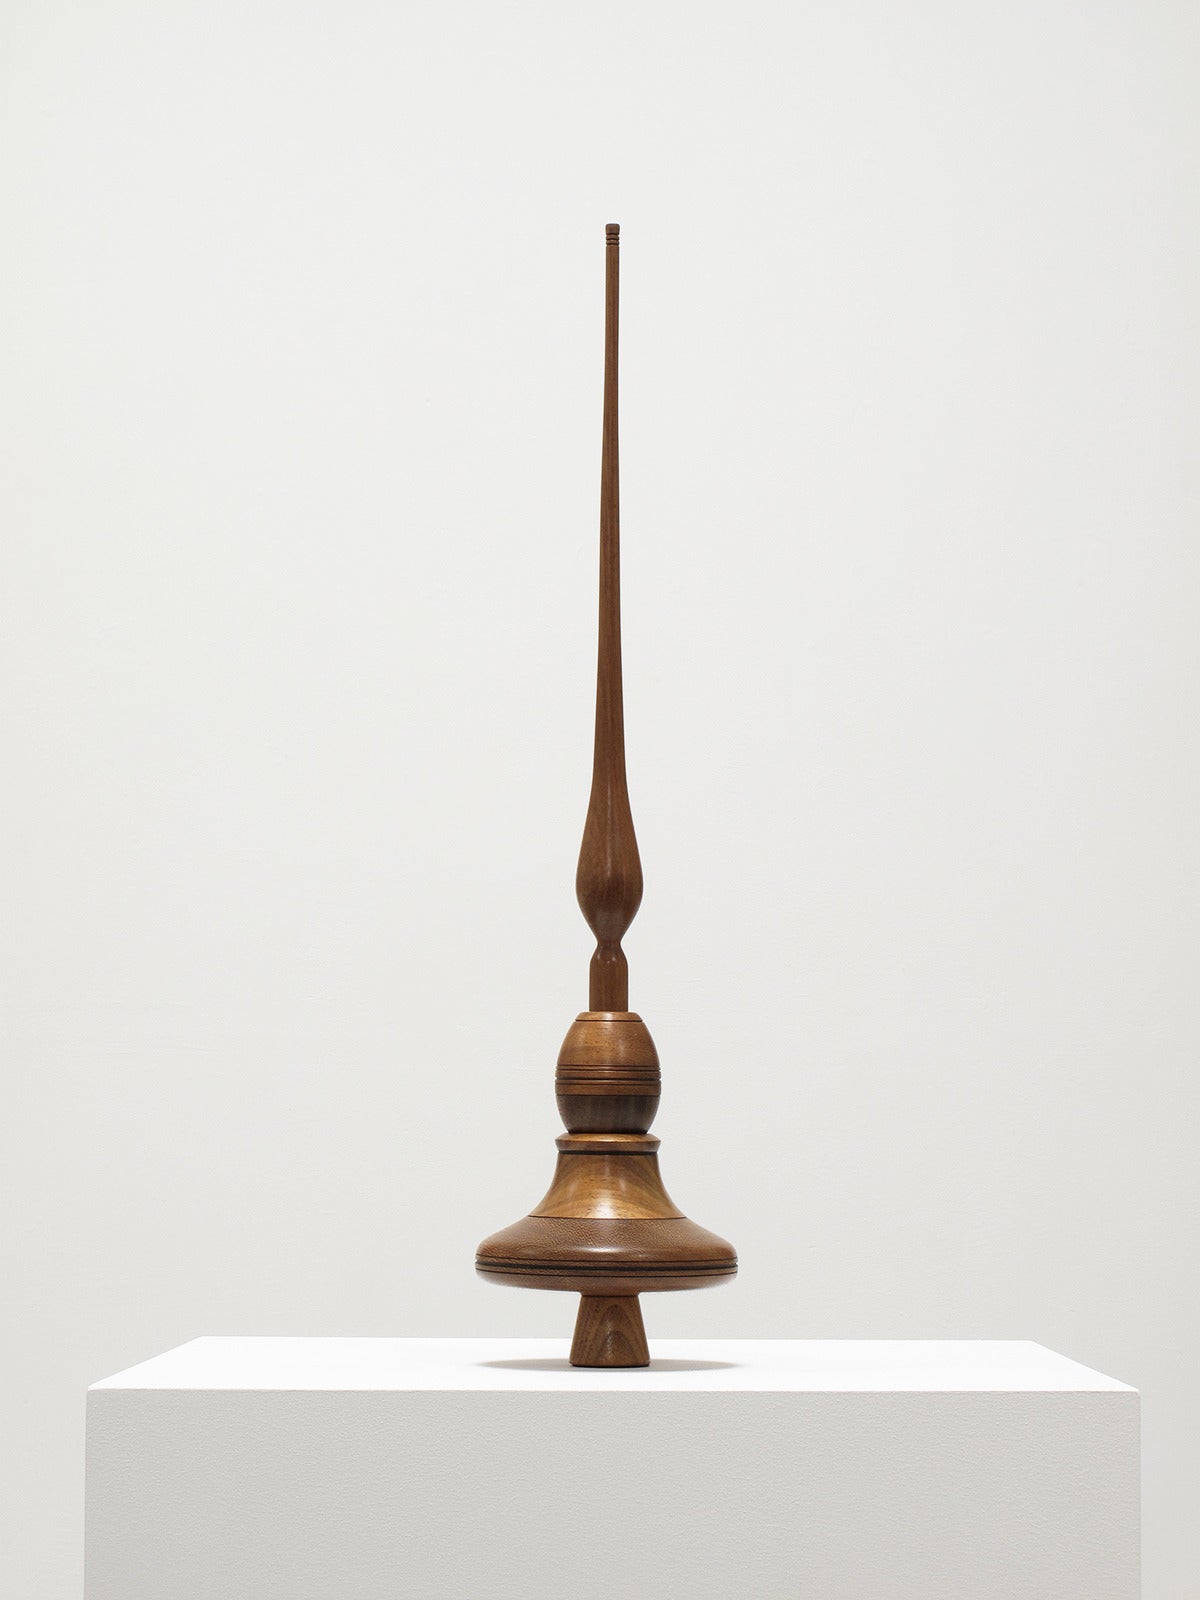 Richard Patterson
Sculpture, 1978
Unique, decorative object and enjoyable spinning top toy
Solid woods: Iroko, Thailand rosewood and black walnut
Hand-turned on a lathe in his California studio

Measurements in inches: 24 1/4 high x 5 1/4